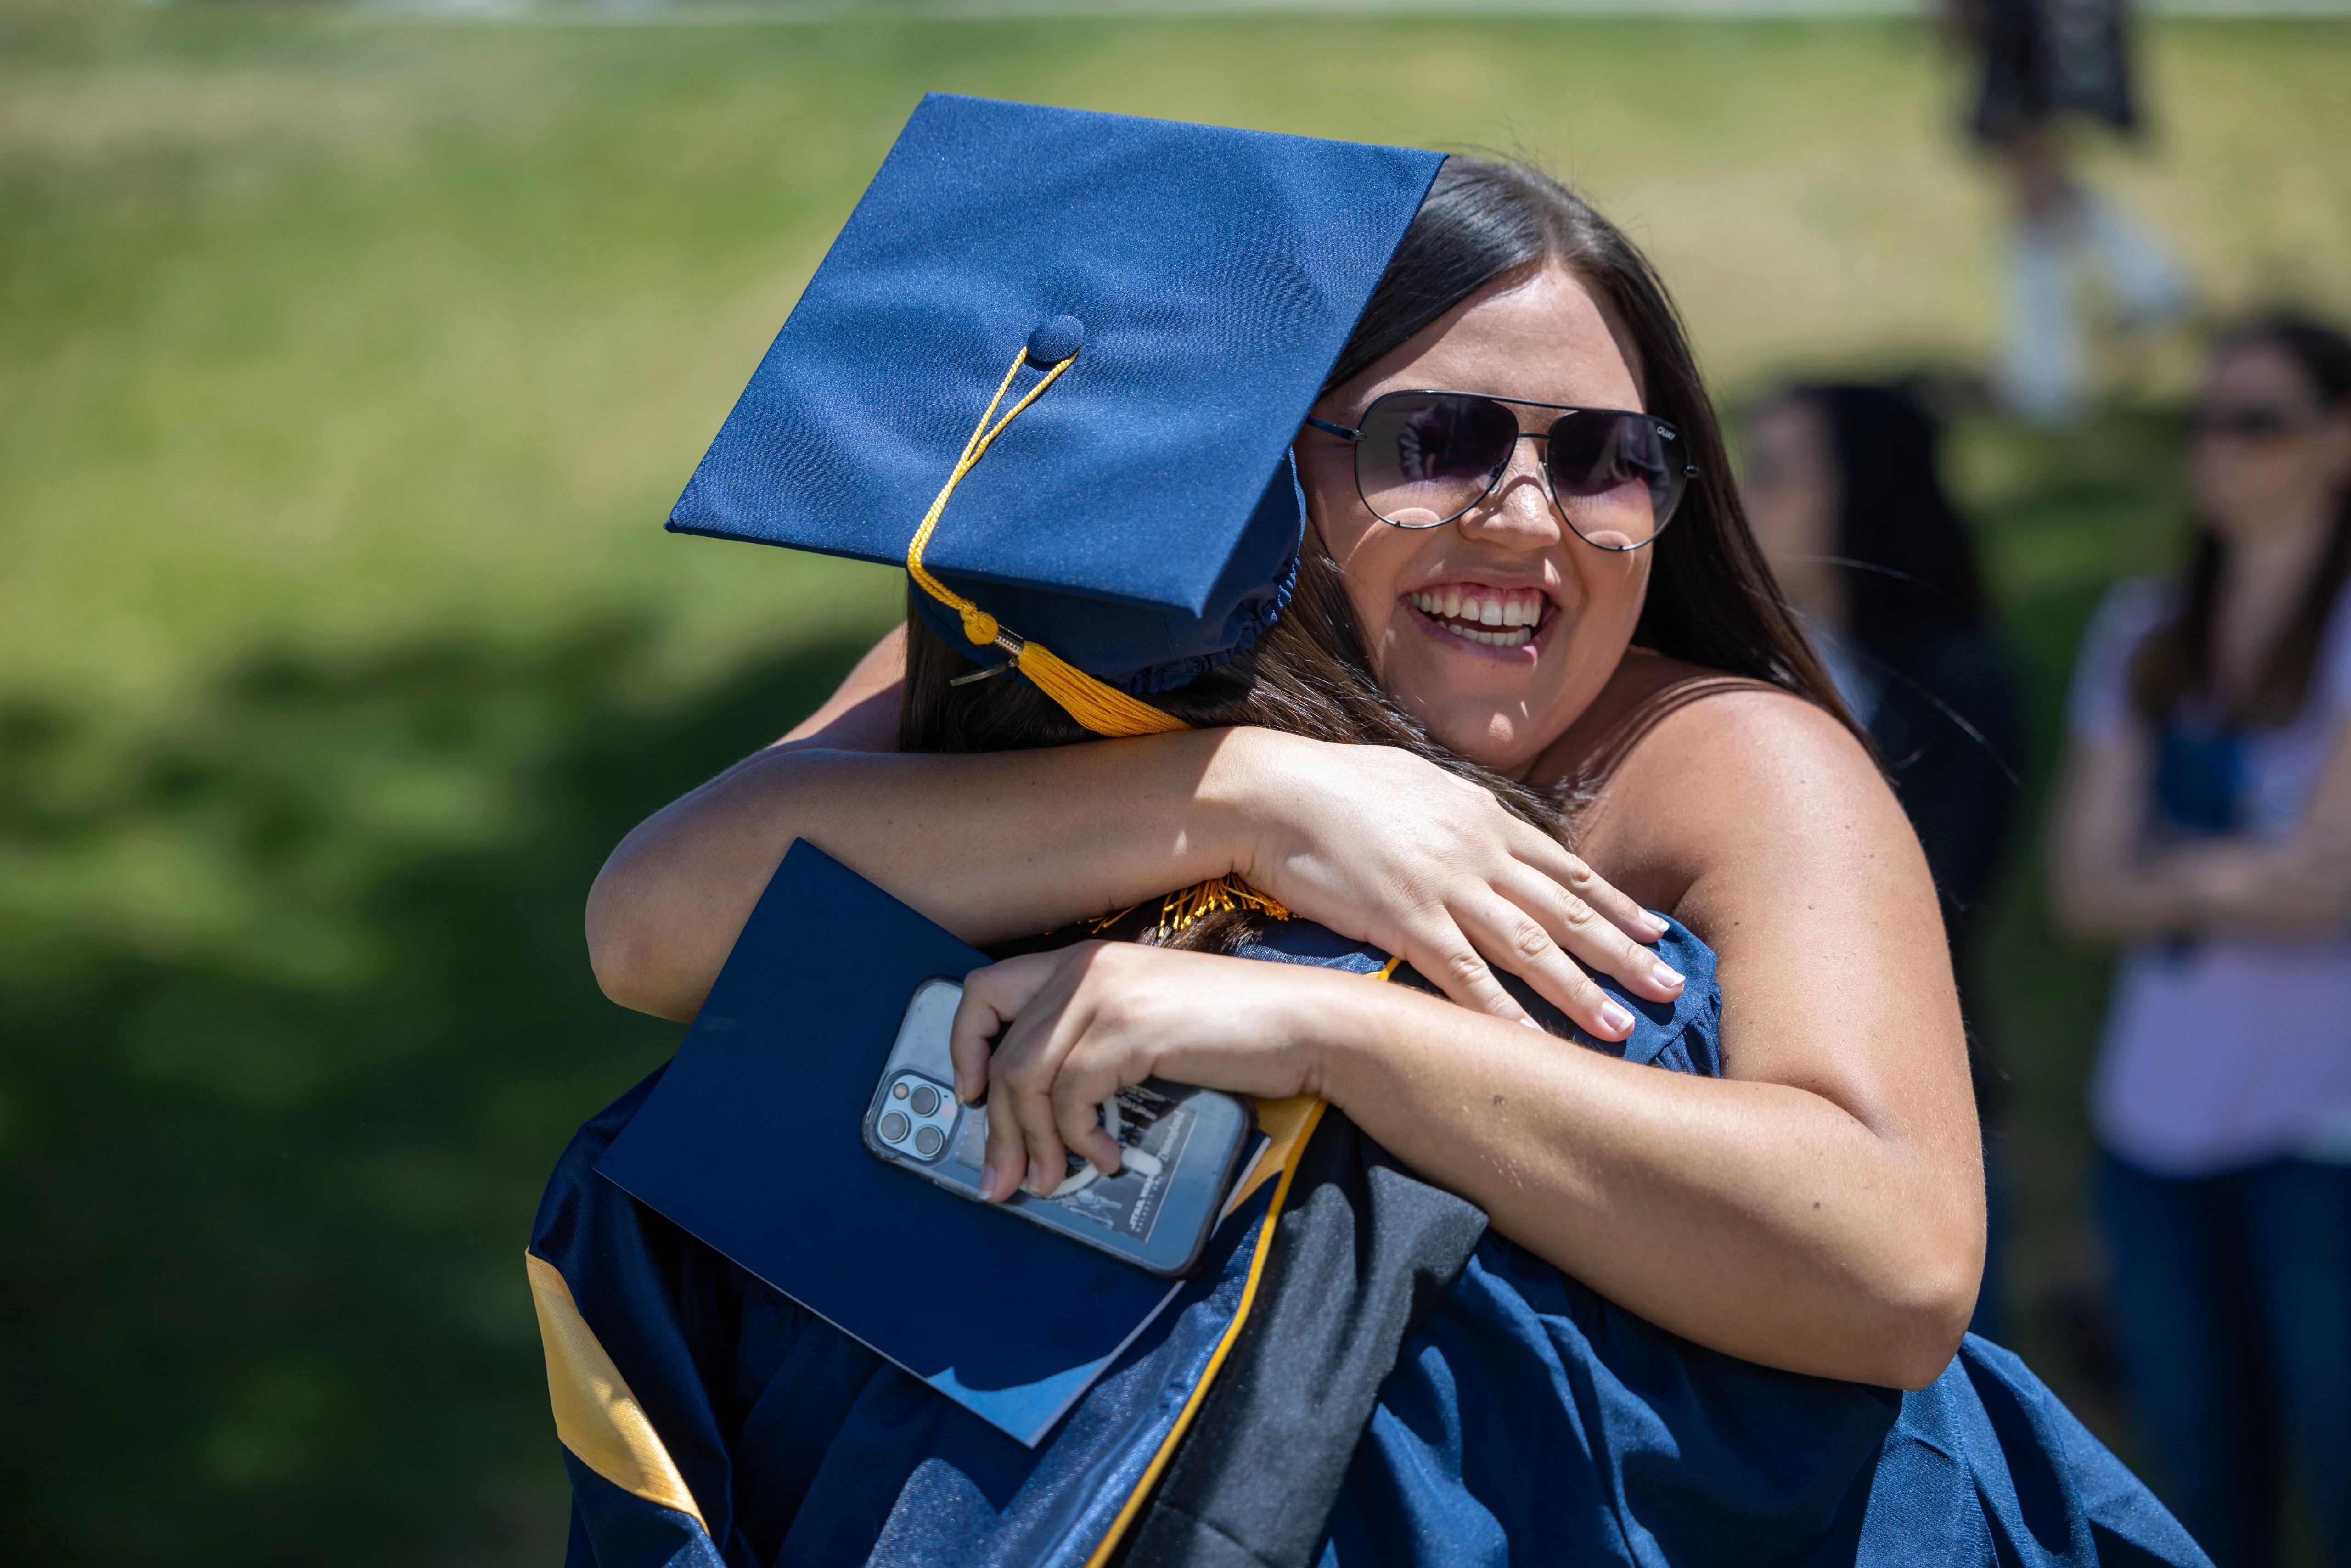 An NAU student hugs a family member outside after commencement is over